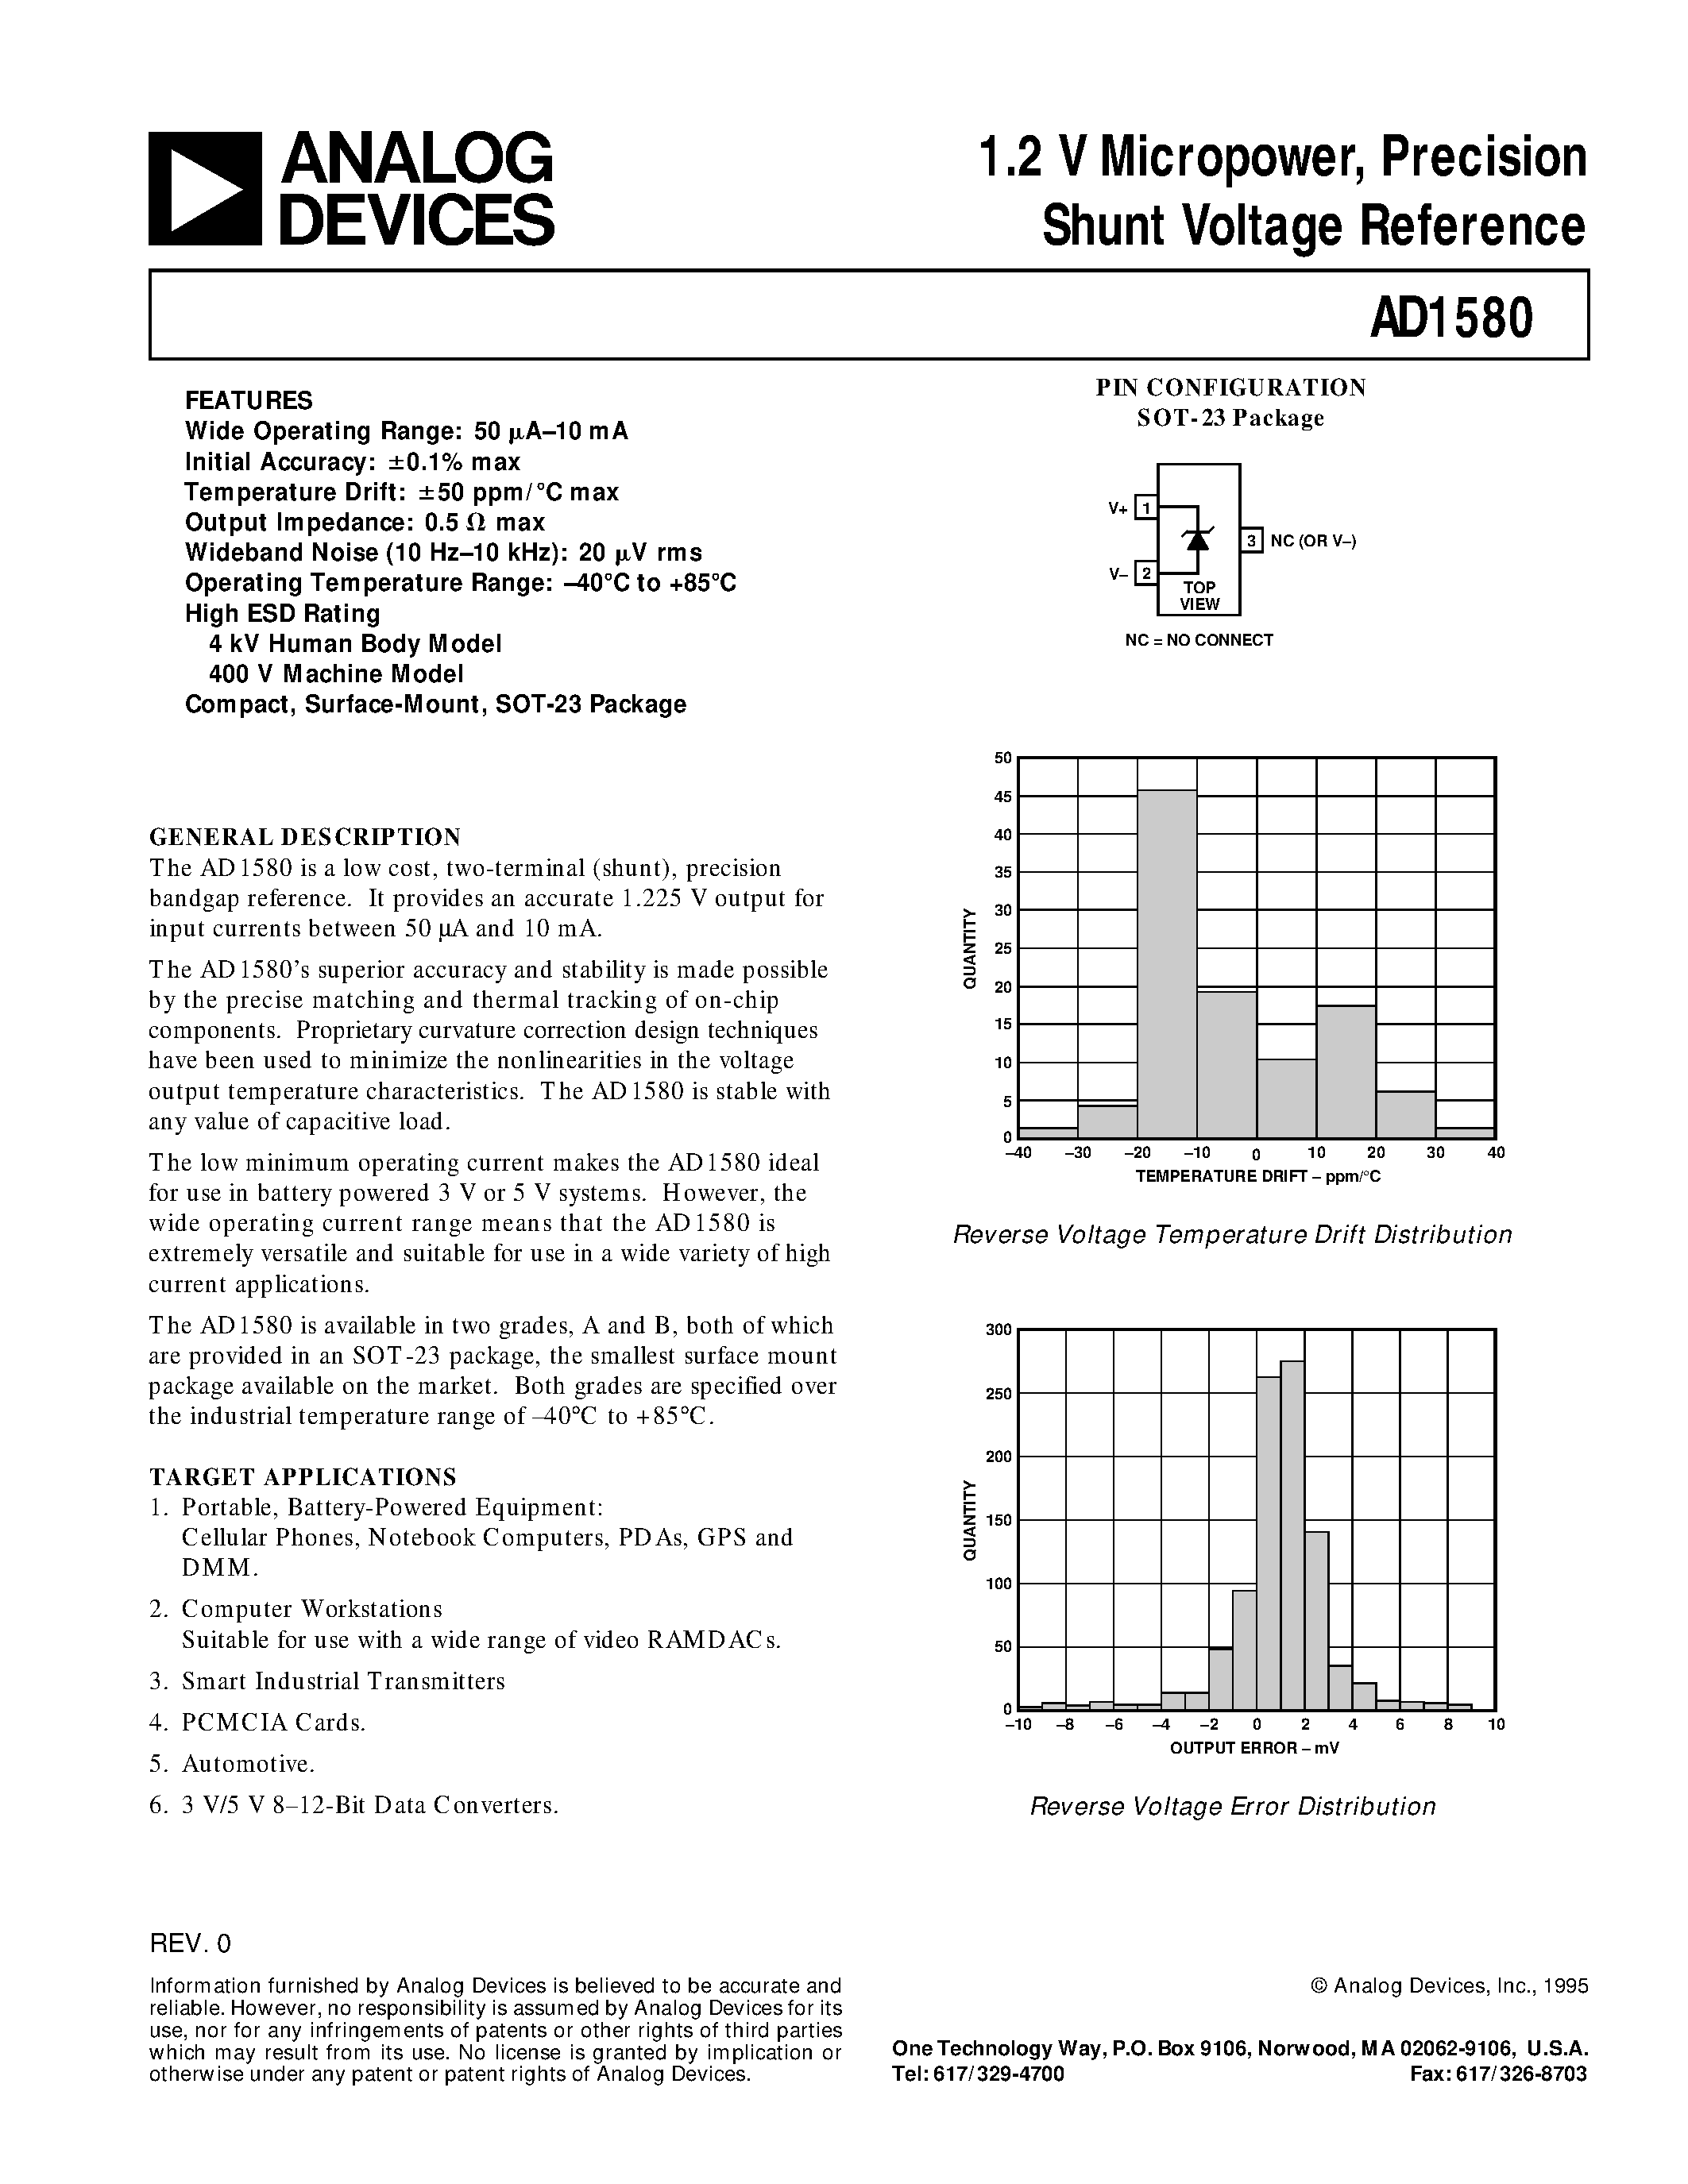 Datasheet AD1580BRT - 1.2 V Micropower/ Precision Shunt Voltage Reference page 1